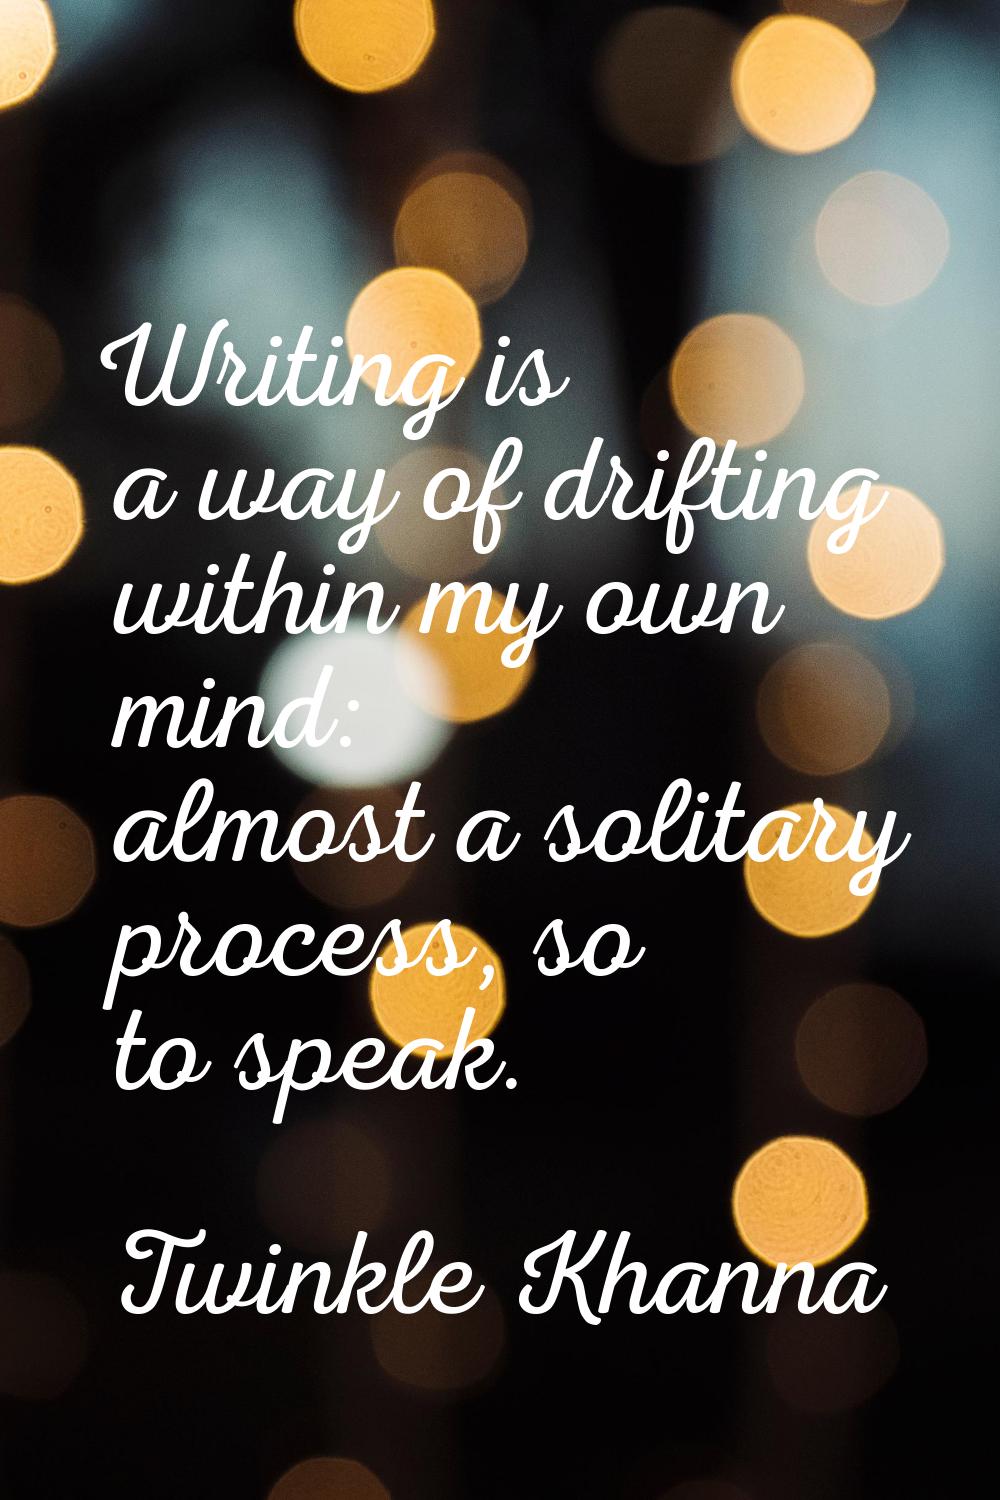 Writing is a way of drifting within my own mind: almost a solitary process, so to speak.